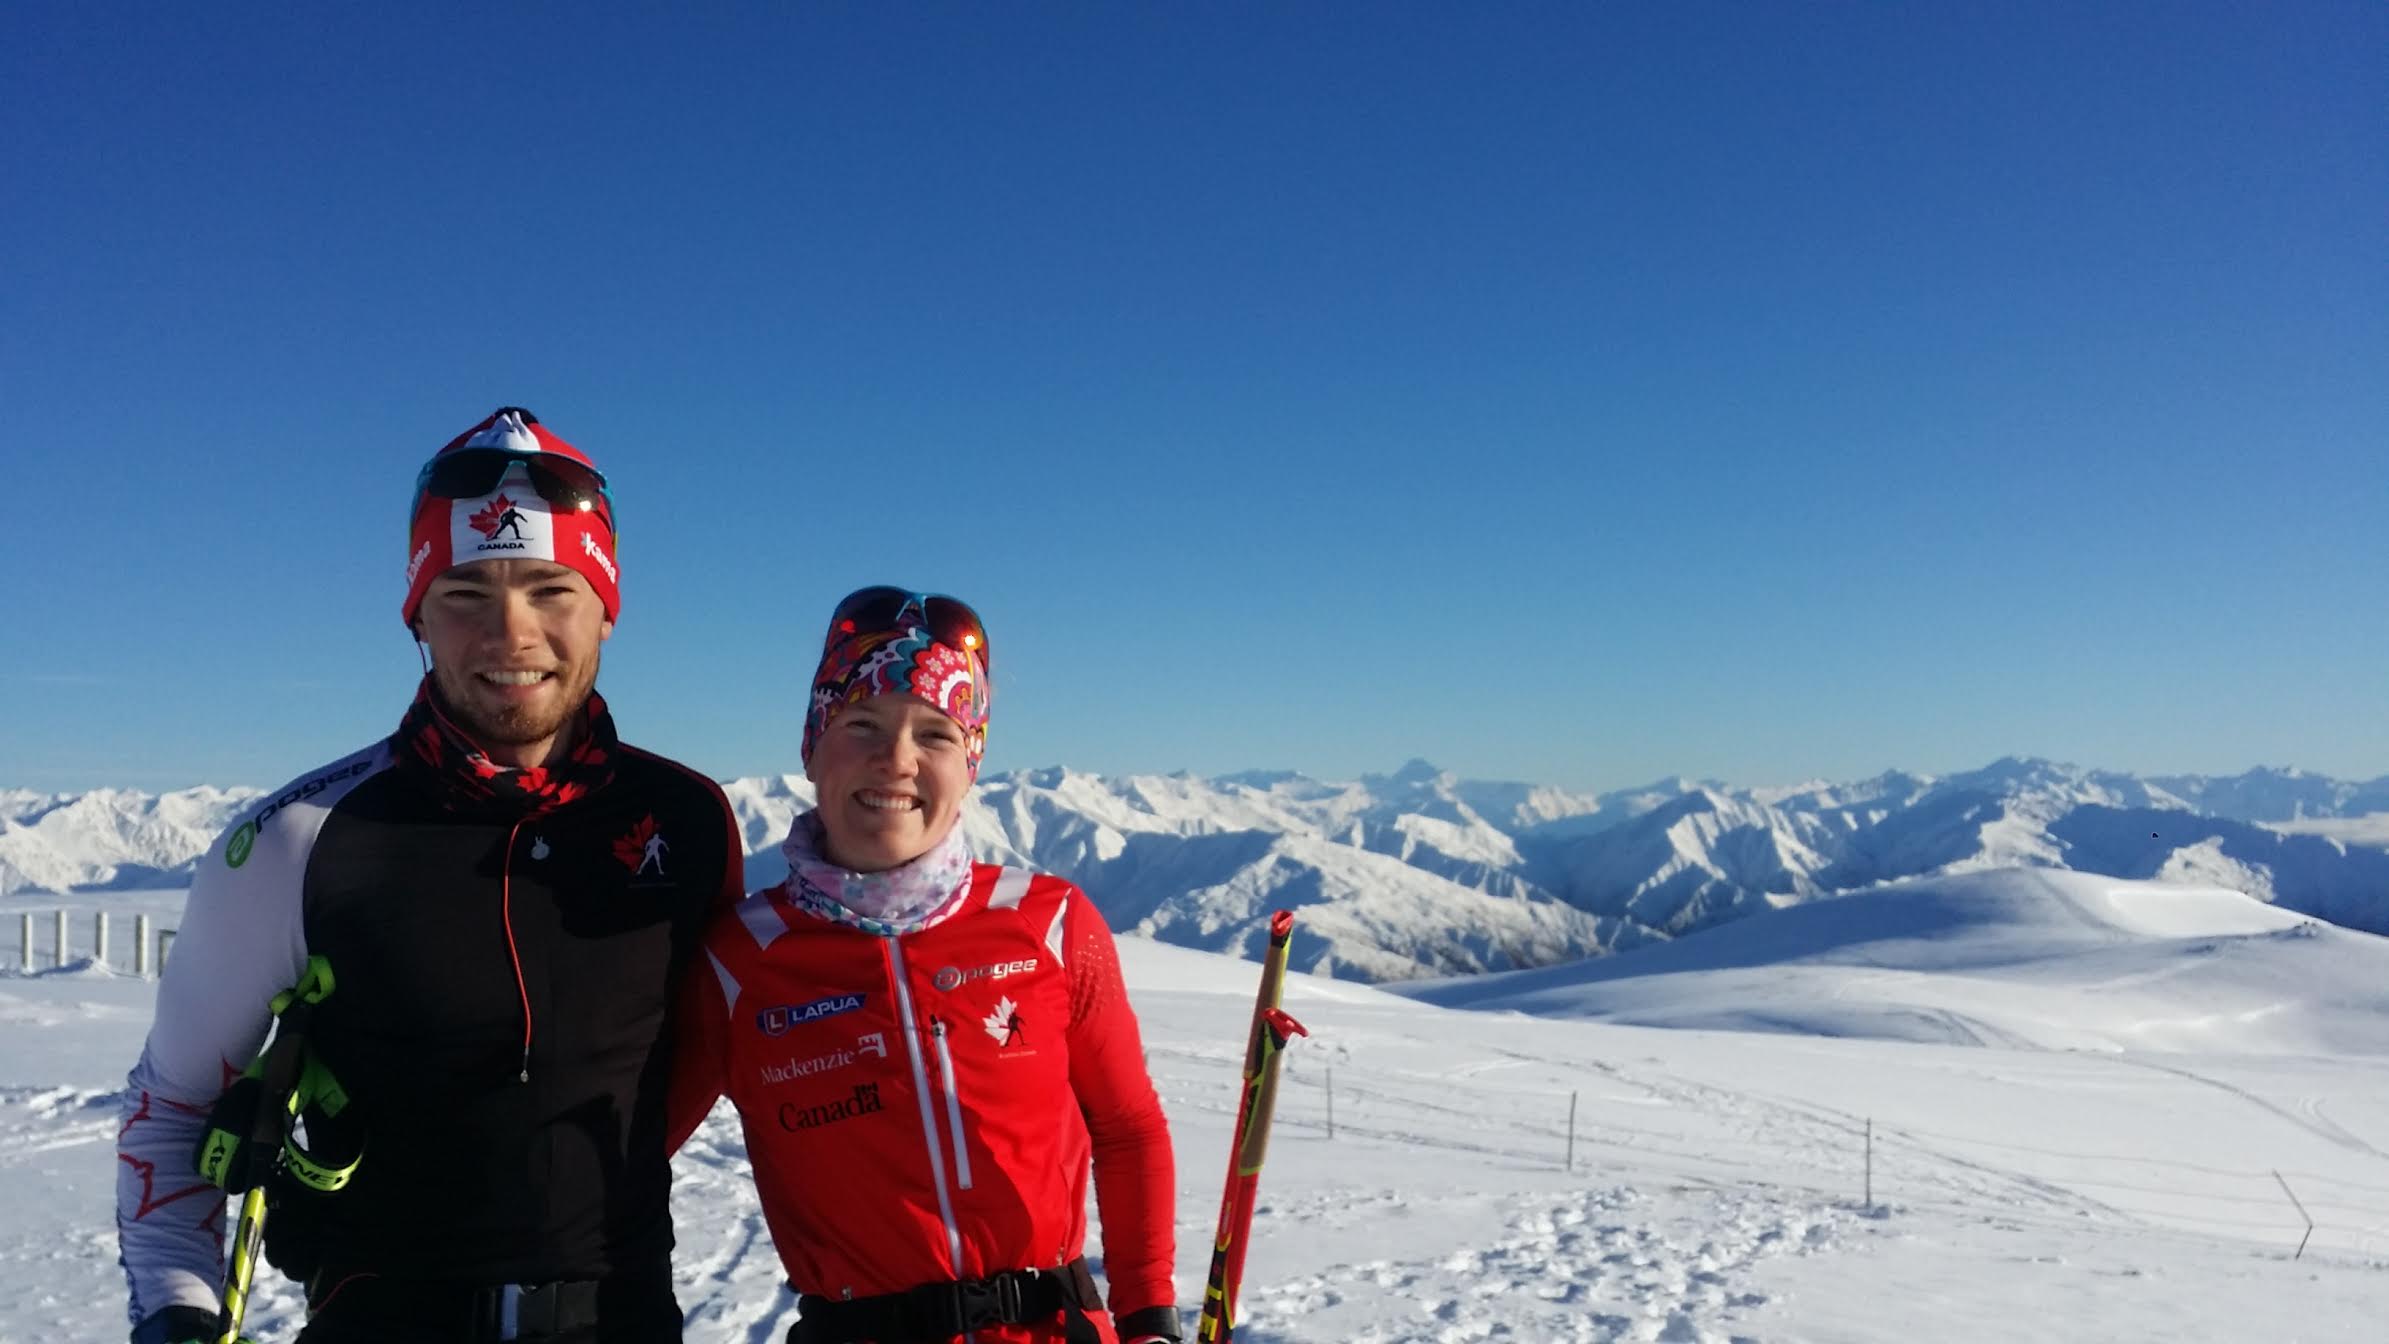 Christian Gow (left) and Emma Lunder skiing at the Snow Farm during the Canadian national team's New Zealand training camp. (Courtesy photo)